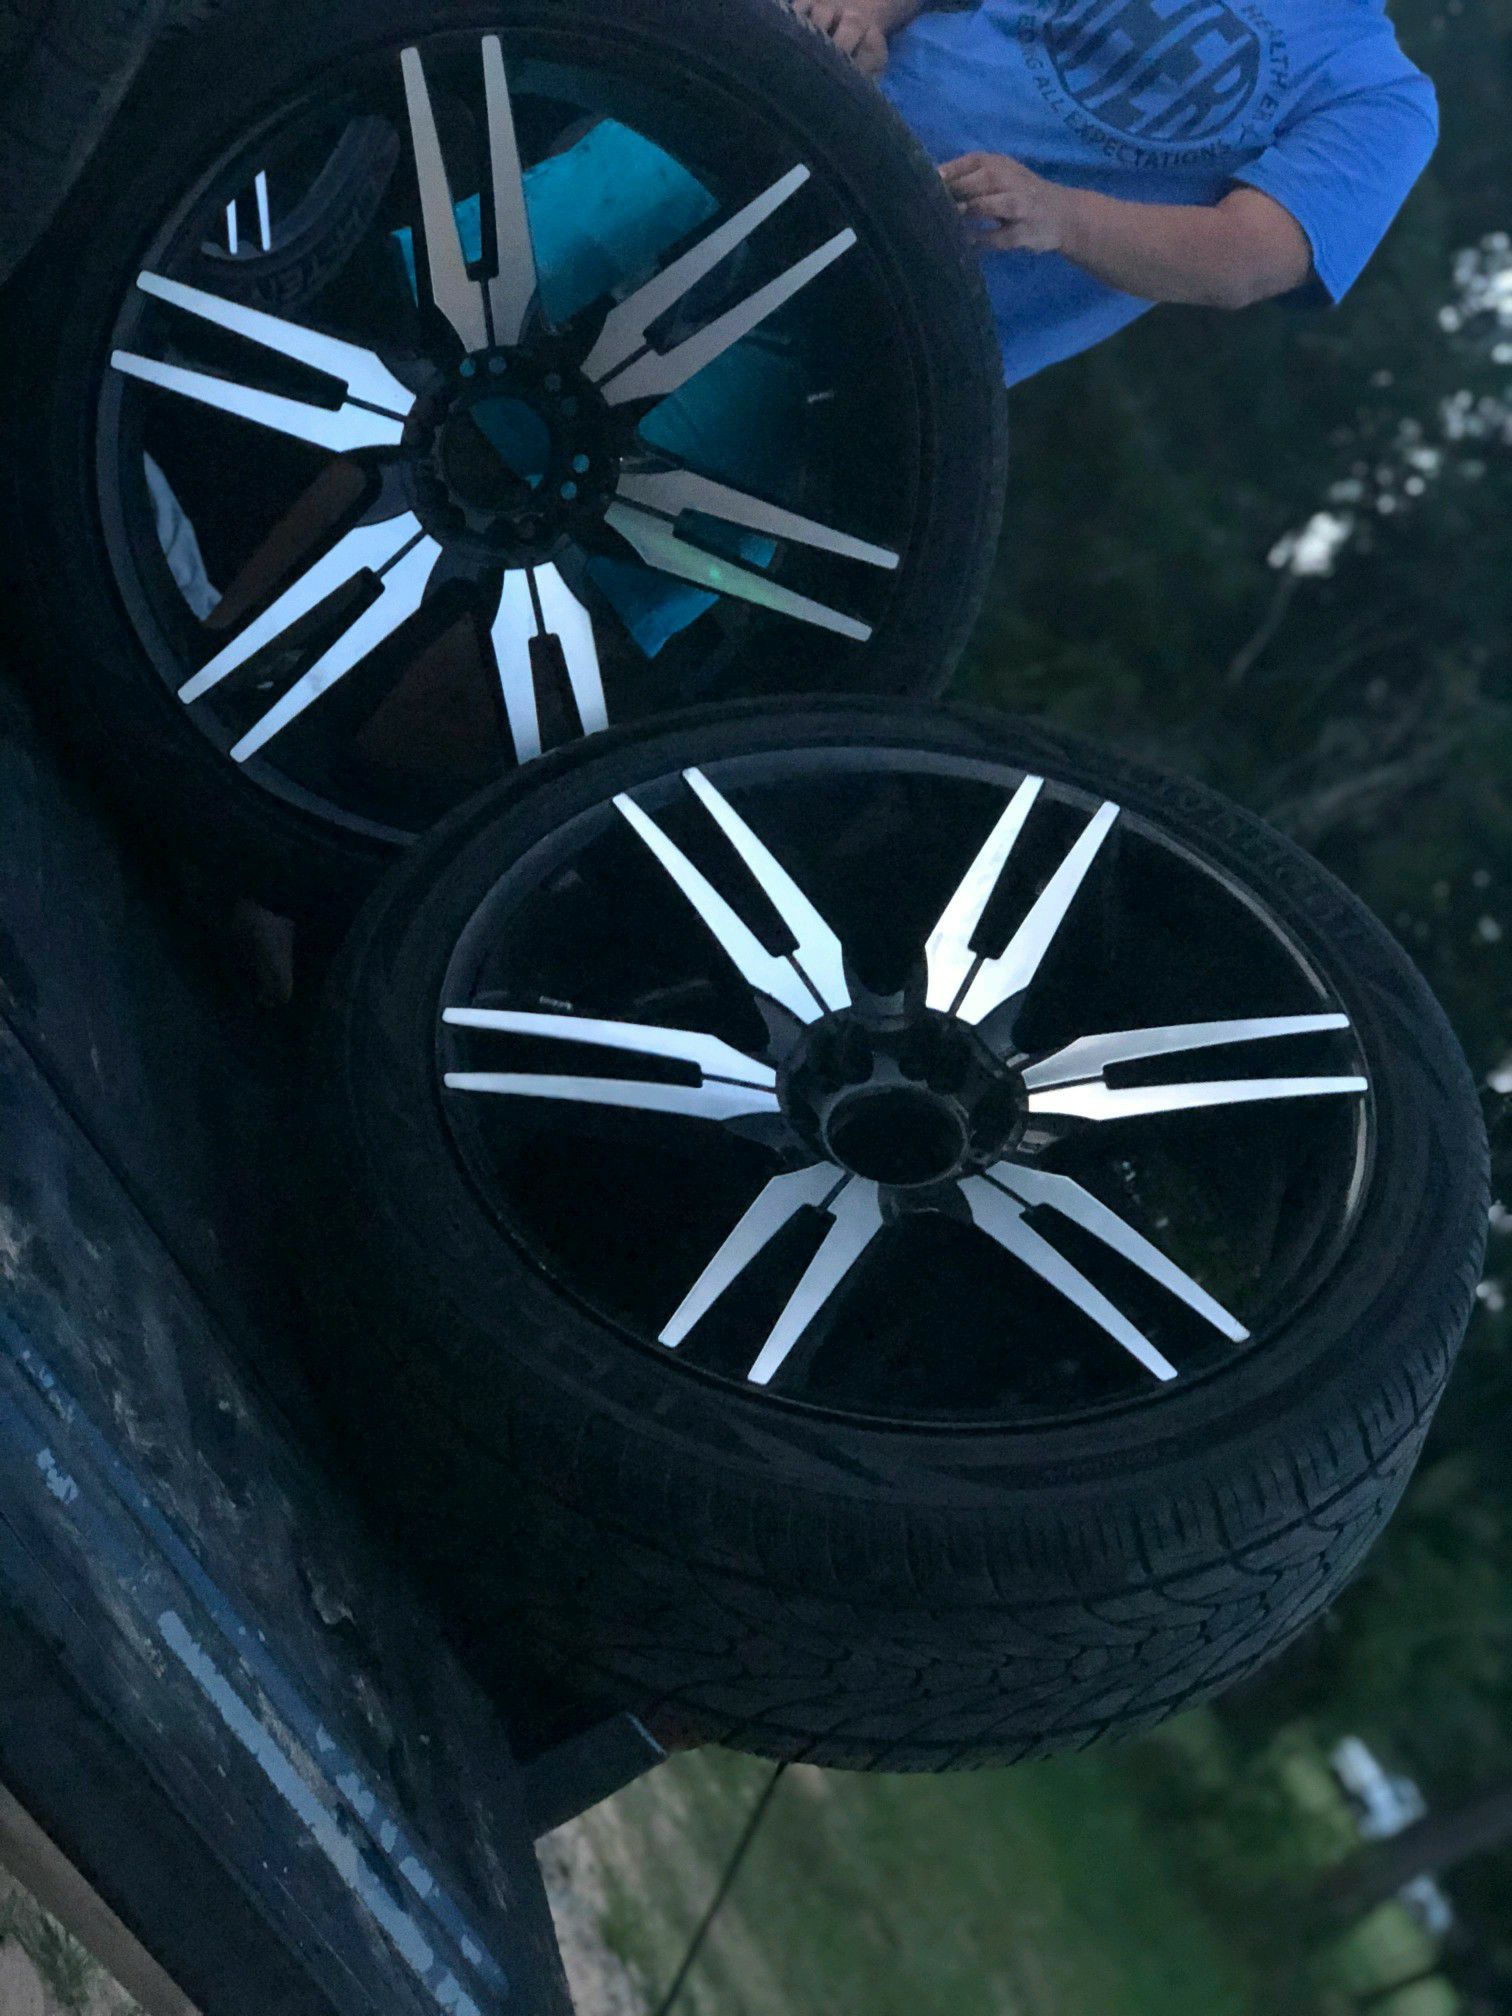 24inch wheels and tires $1300 or best offer.